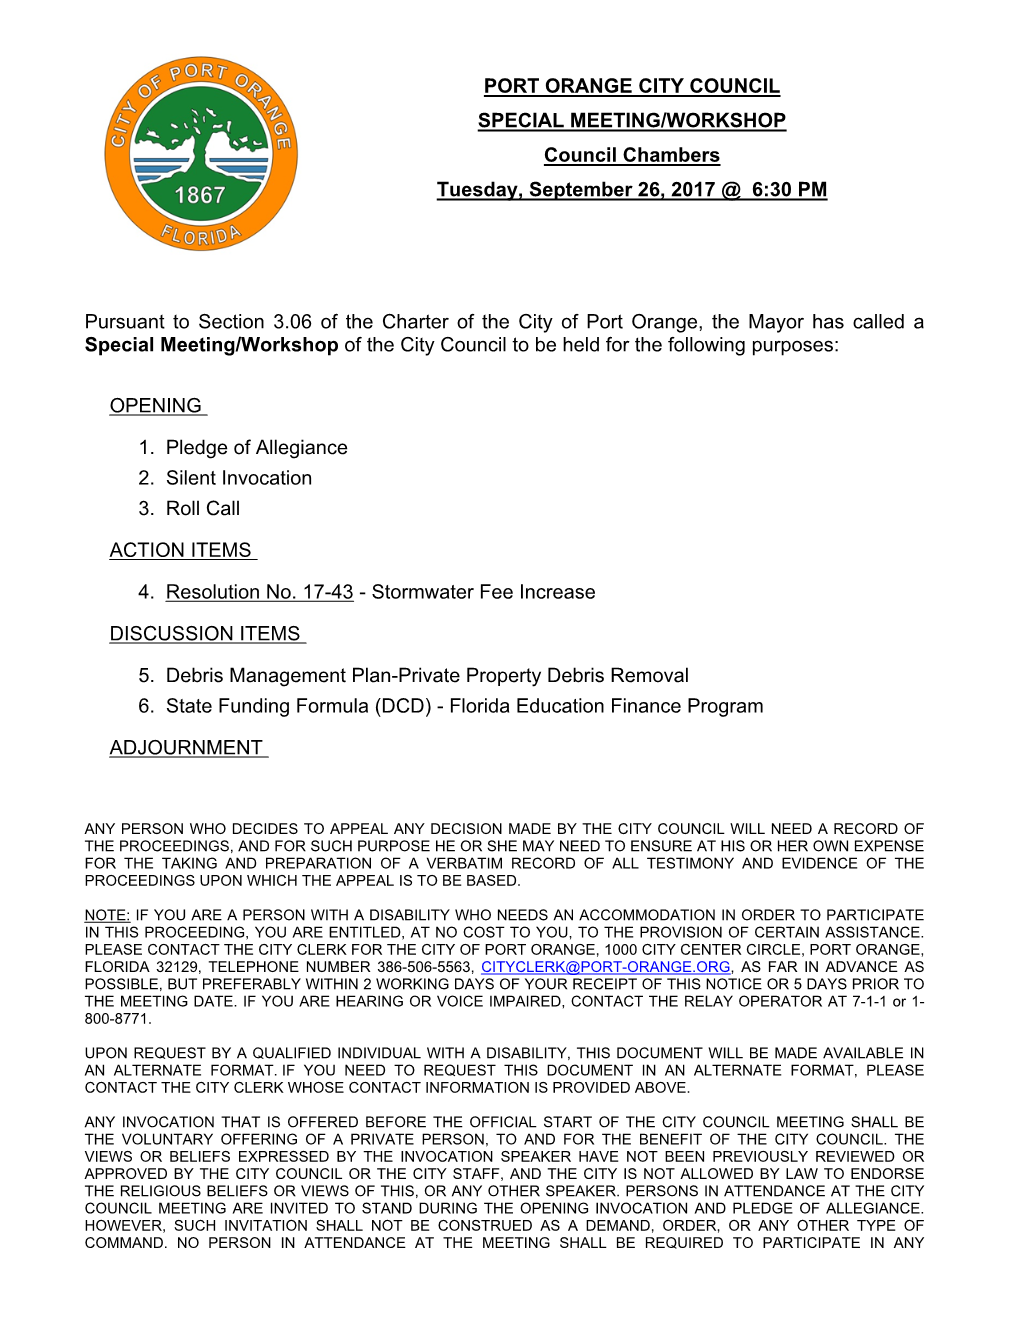 PORT ORANGE CITY COUNCIL SPECIAL MEETING/WORKSHOP Council Chambers 1867 Tuesday, September 26, 2017 @ 6:30 PM